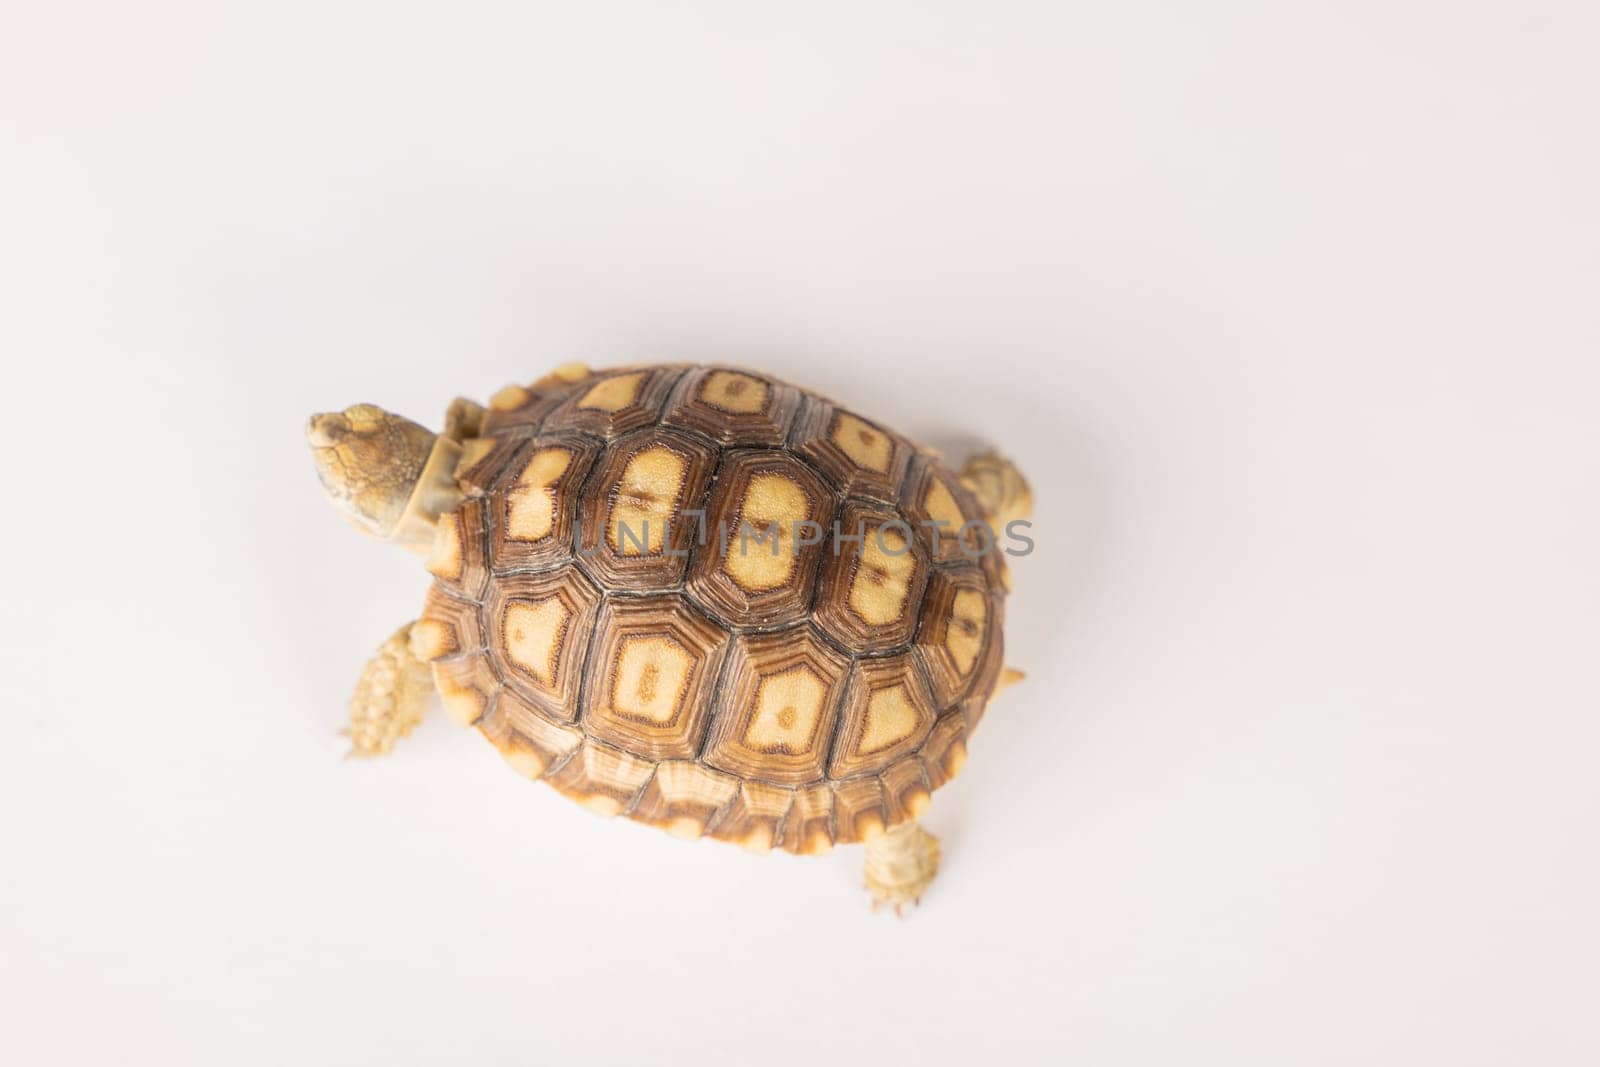 In this isolated portrait, a little African spurred tortoise reveals the beauty of its unique design and cute features against a white background. by Sorapop